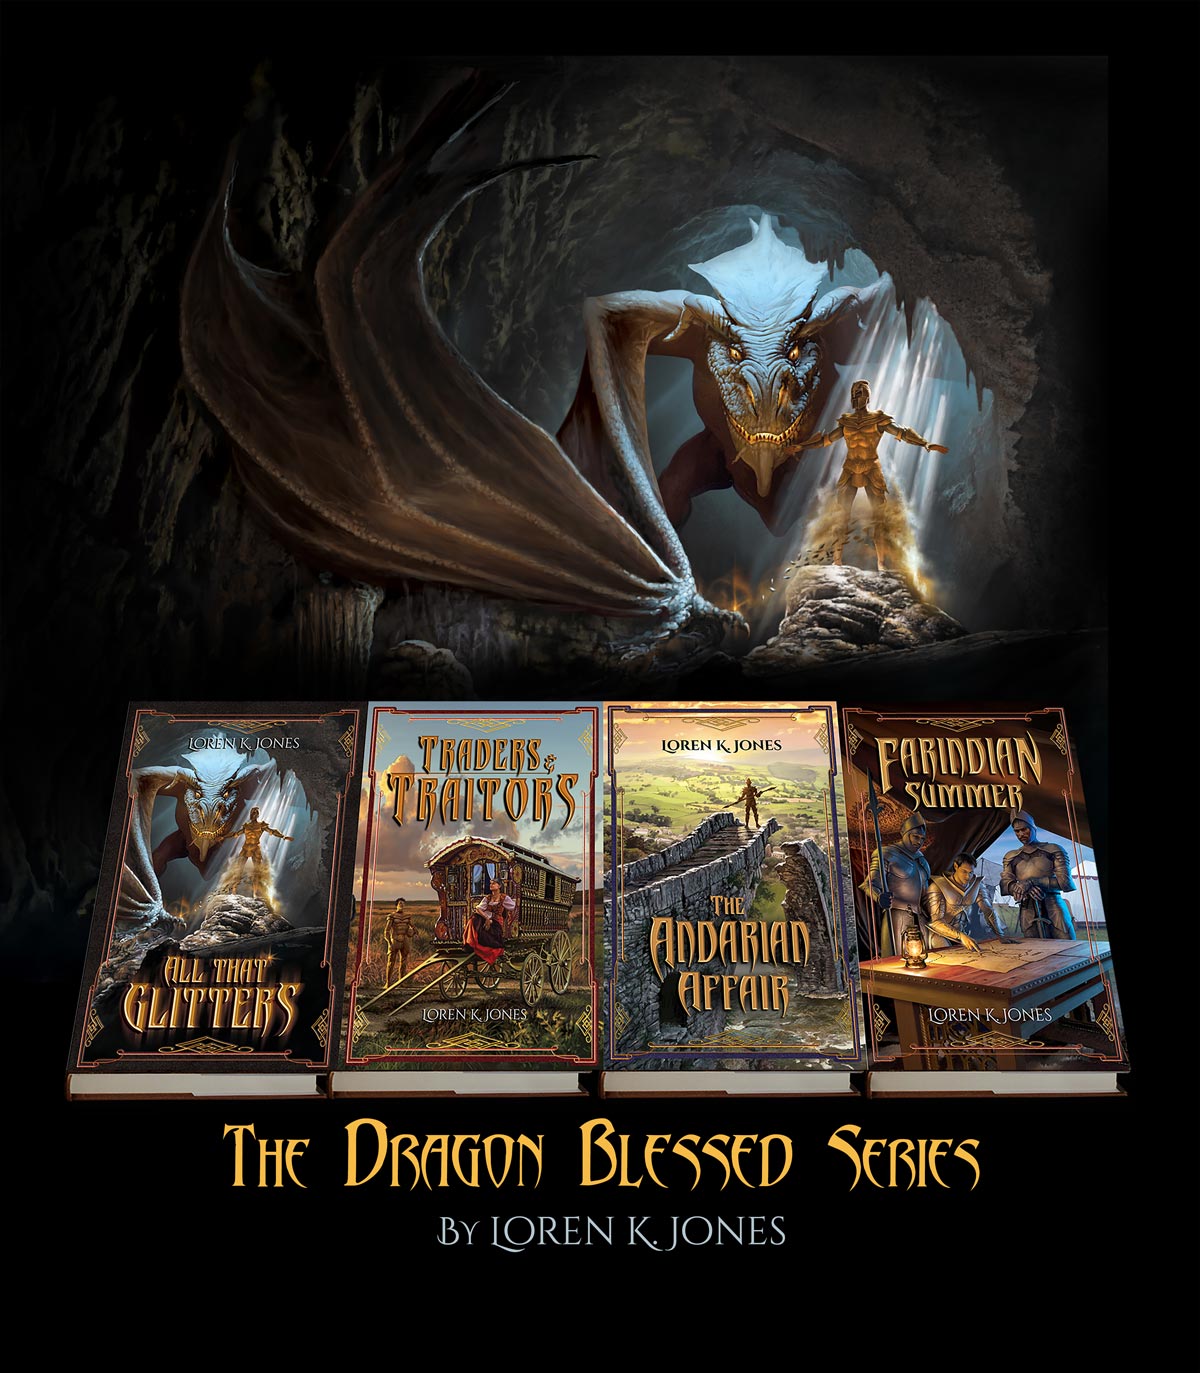 Book cover designs for the Dragon Blessed Series